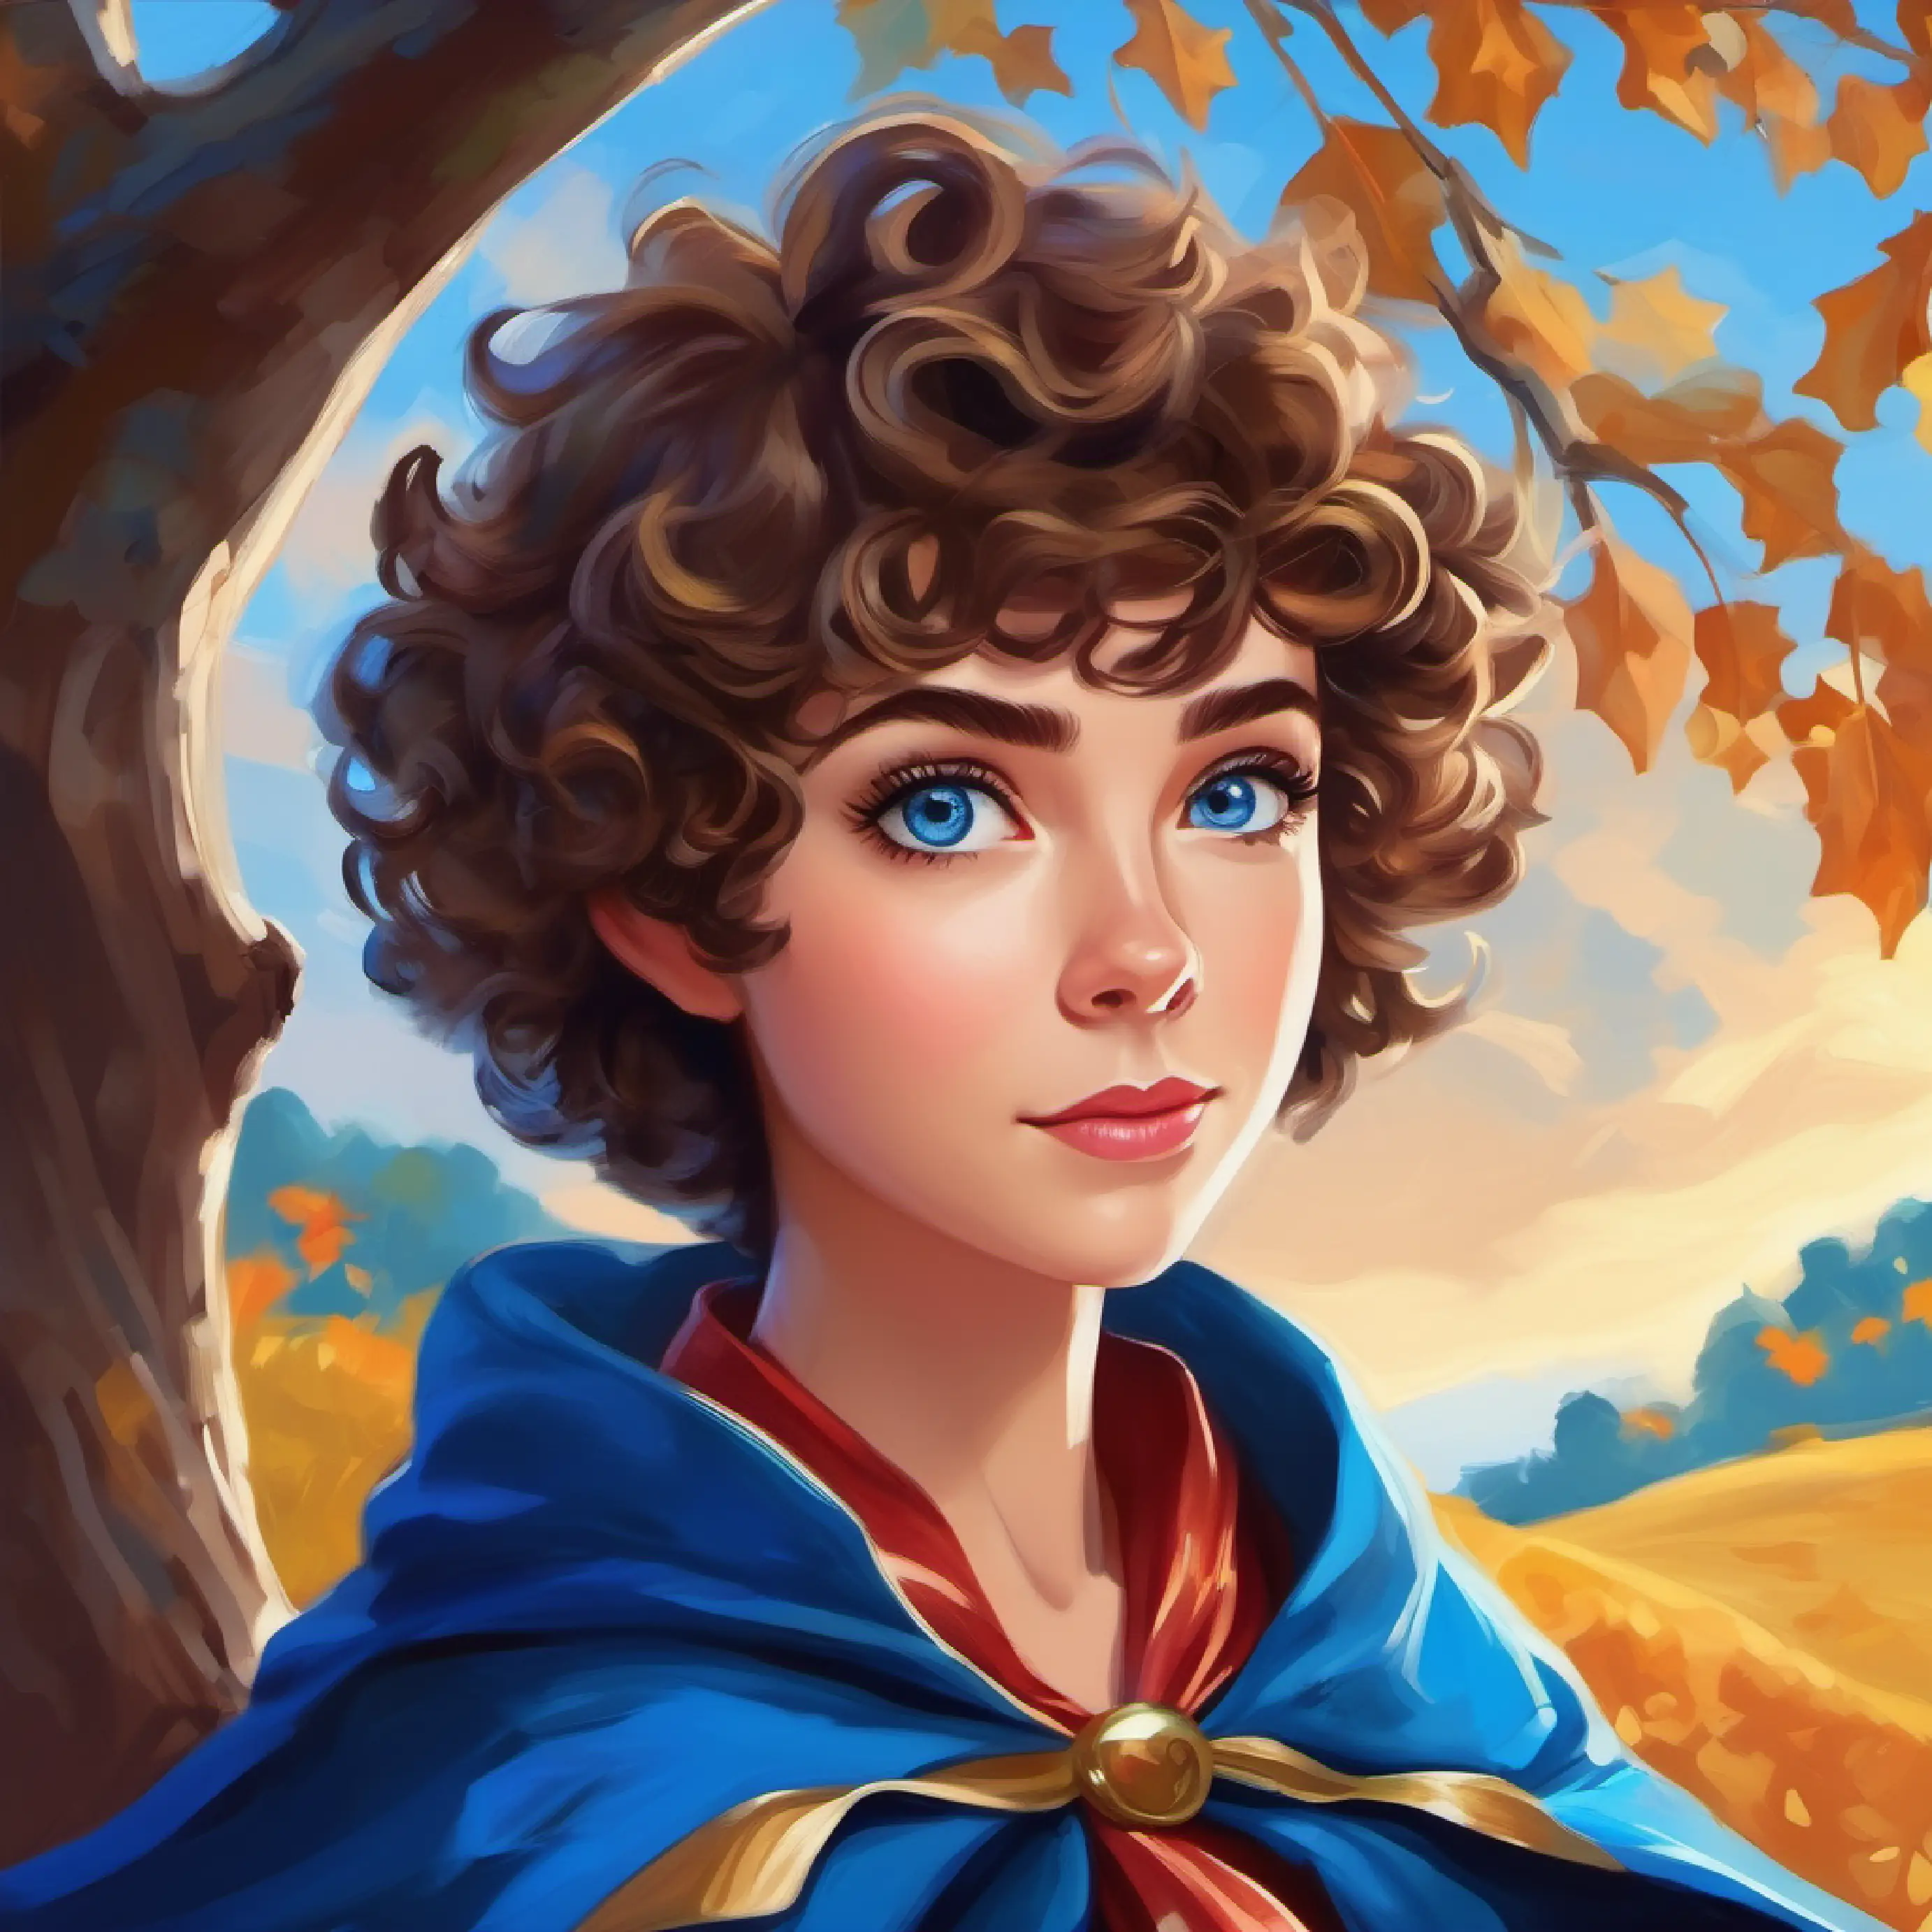 Short, curly hair, bright blue eyes, wearing a cape under oak tree, ready to imagine